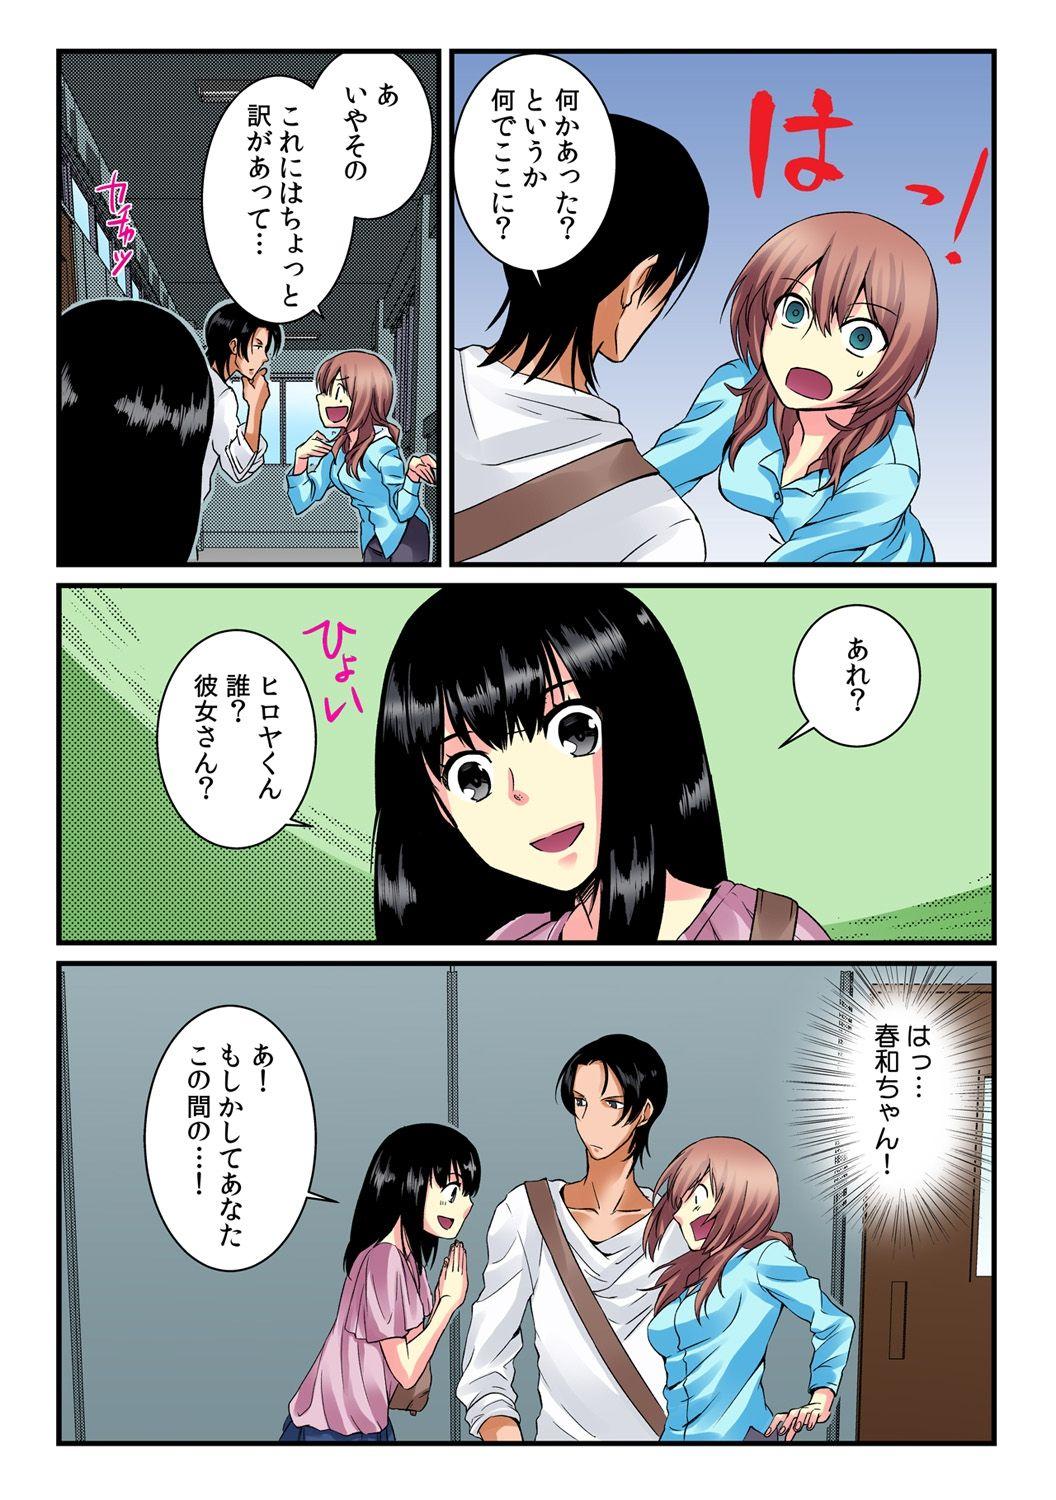 [Akagi Gijou / Akahige] I became a girl- and I definitely can't let anyone find out! (Full color) 2 31